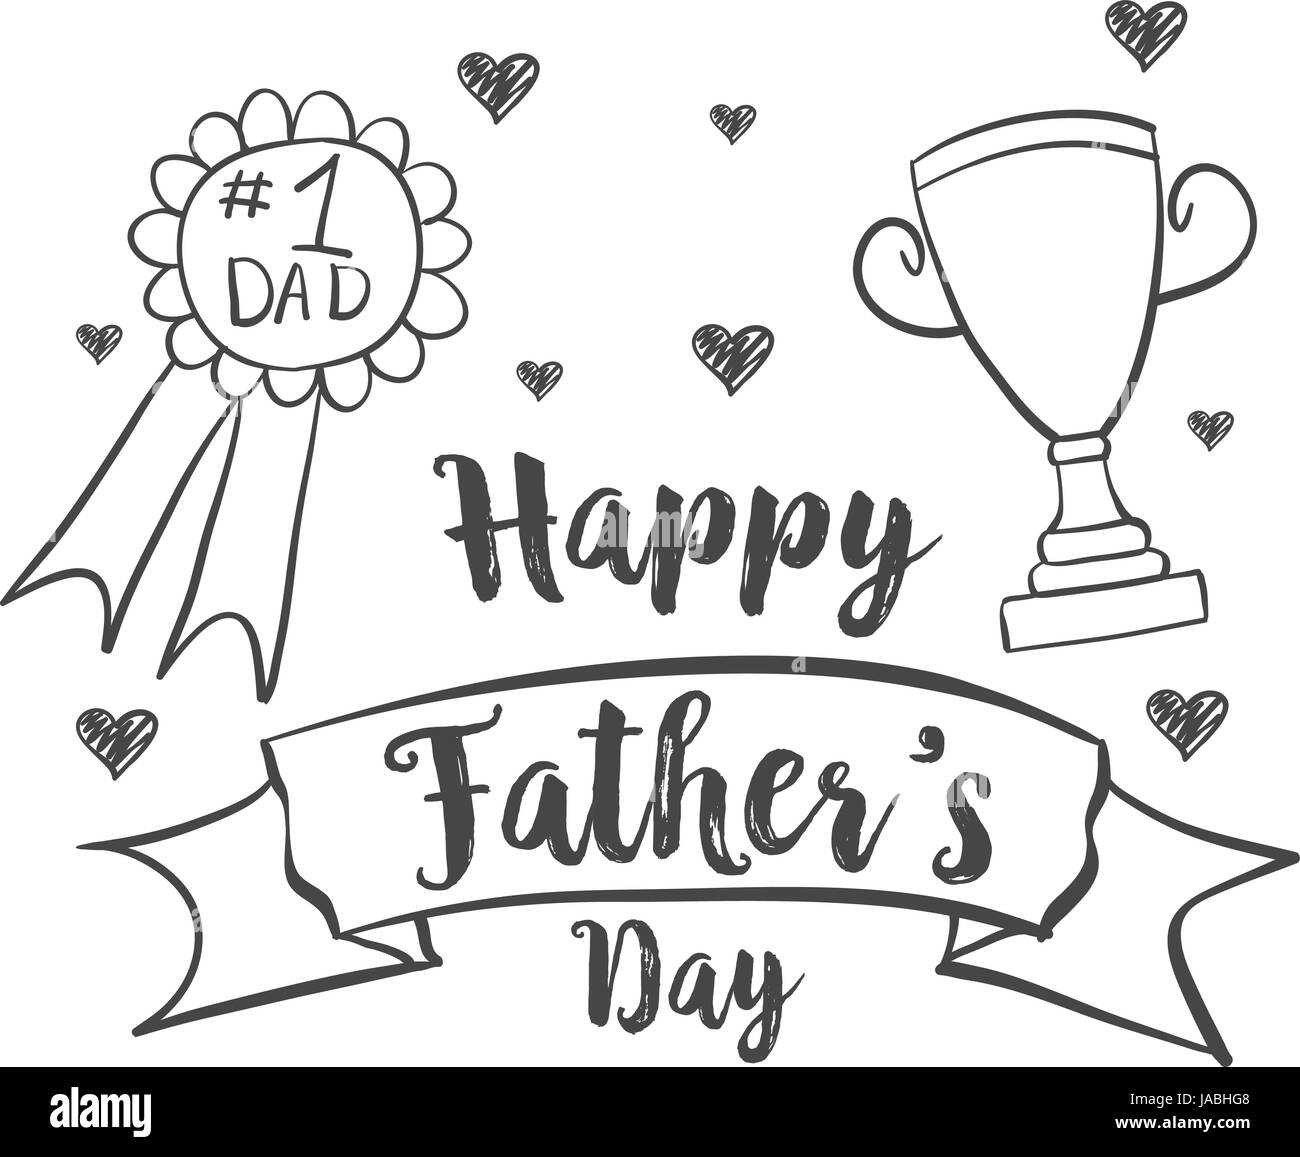 Happy father's day easy drawing with pencil - YouTube-saigonsouth.com.vn